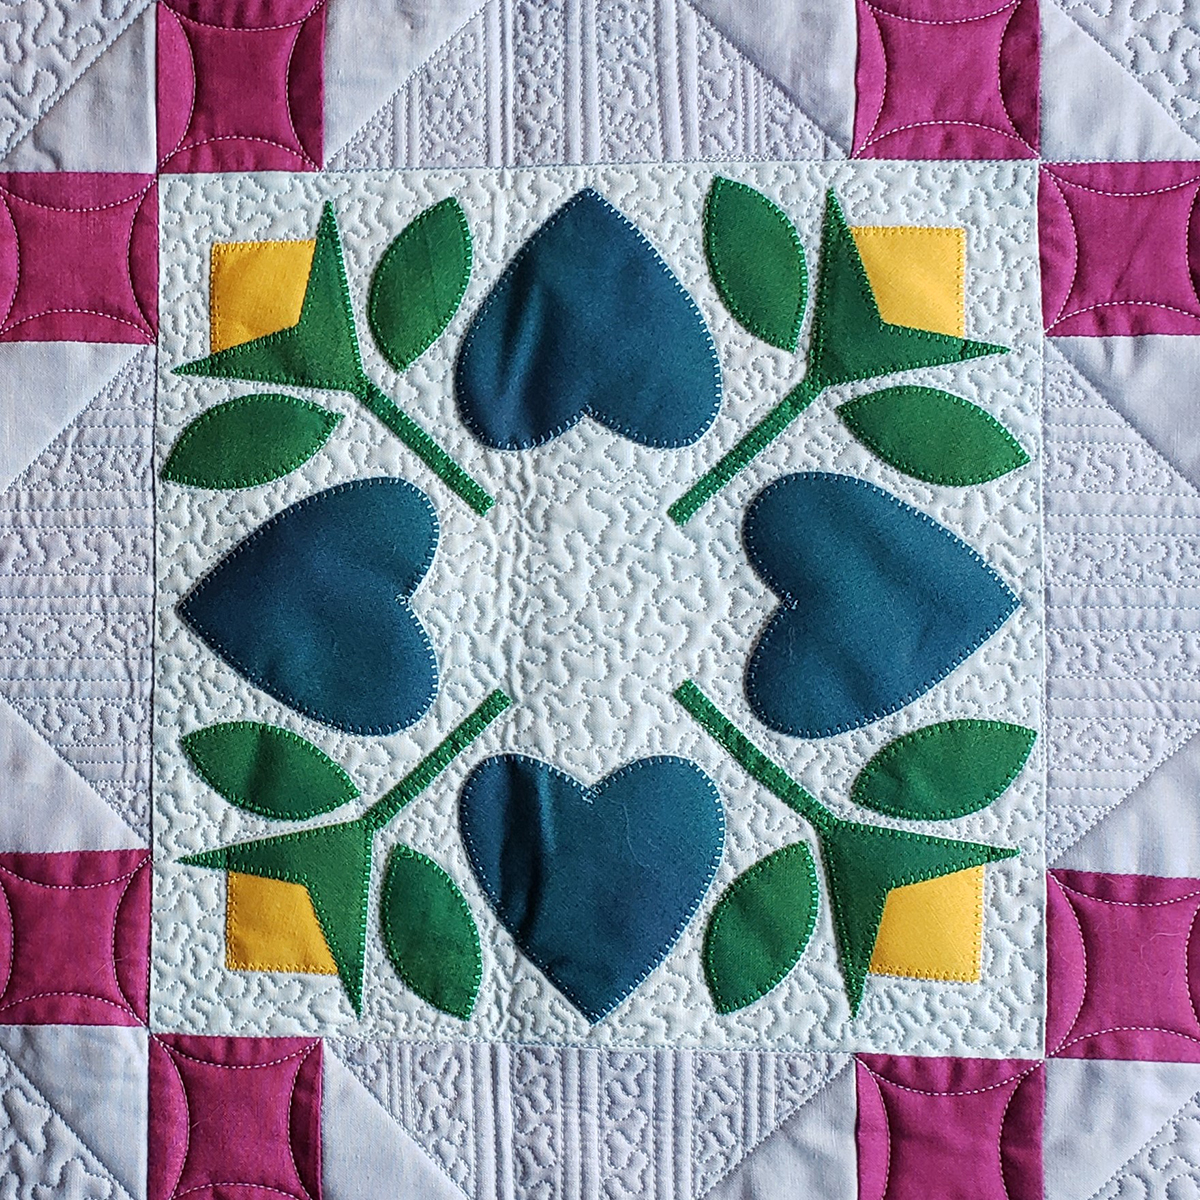 Quilting with Triangles, Part 2: Piecing - WeAllSew